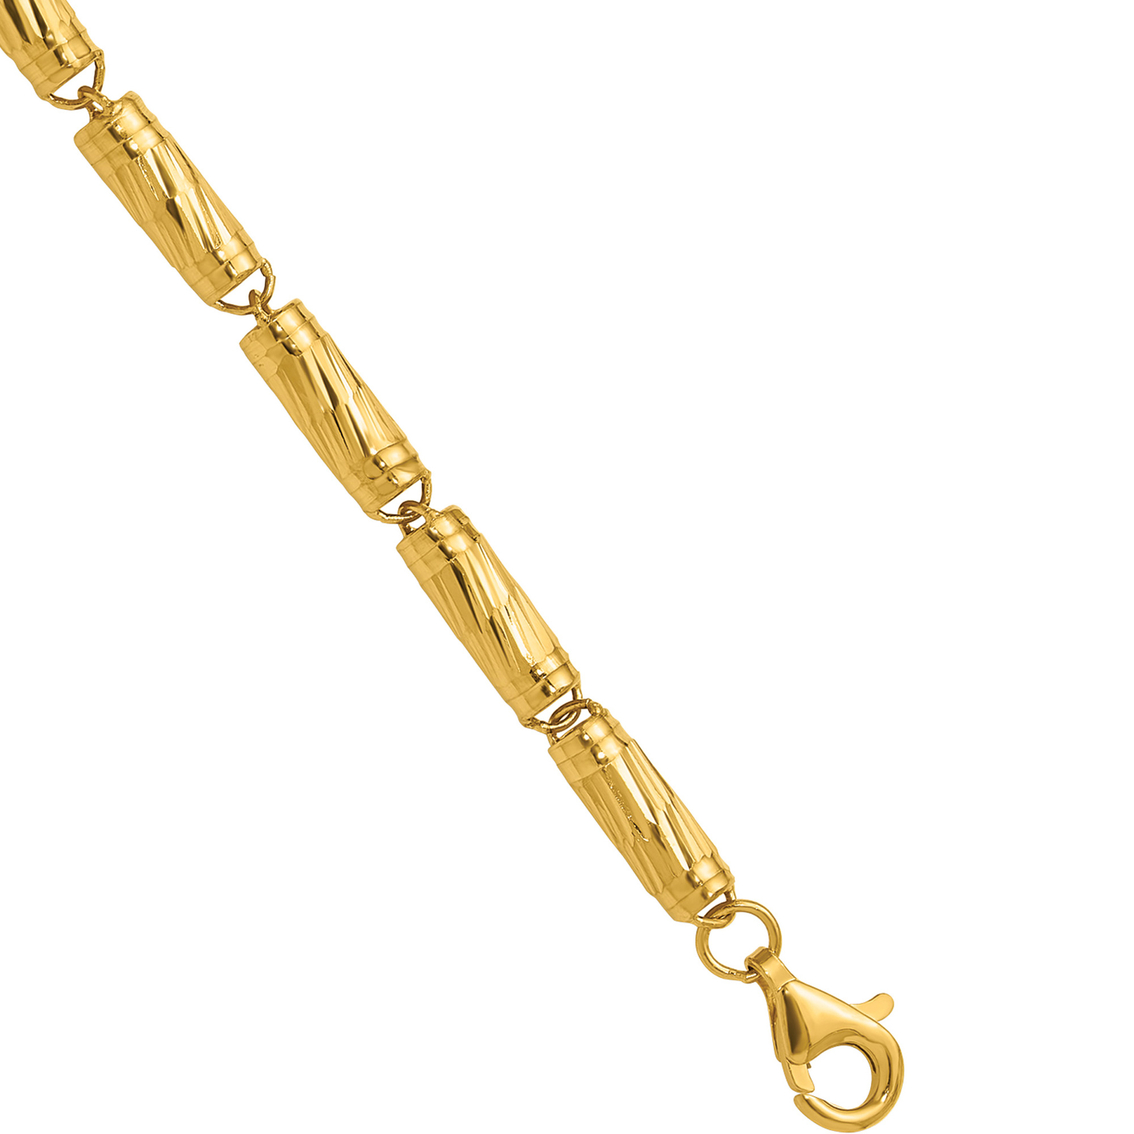 24K Pure Gold Bamboo Link Chain Bracelet - Image 4 of 5